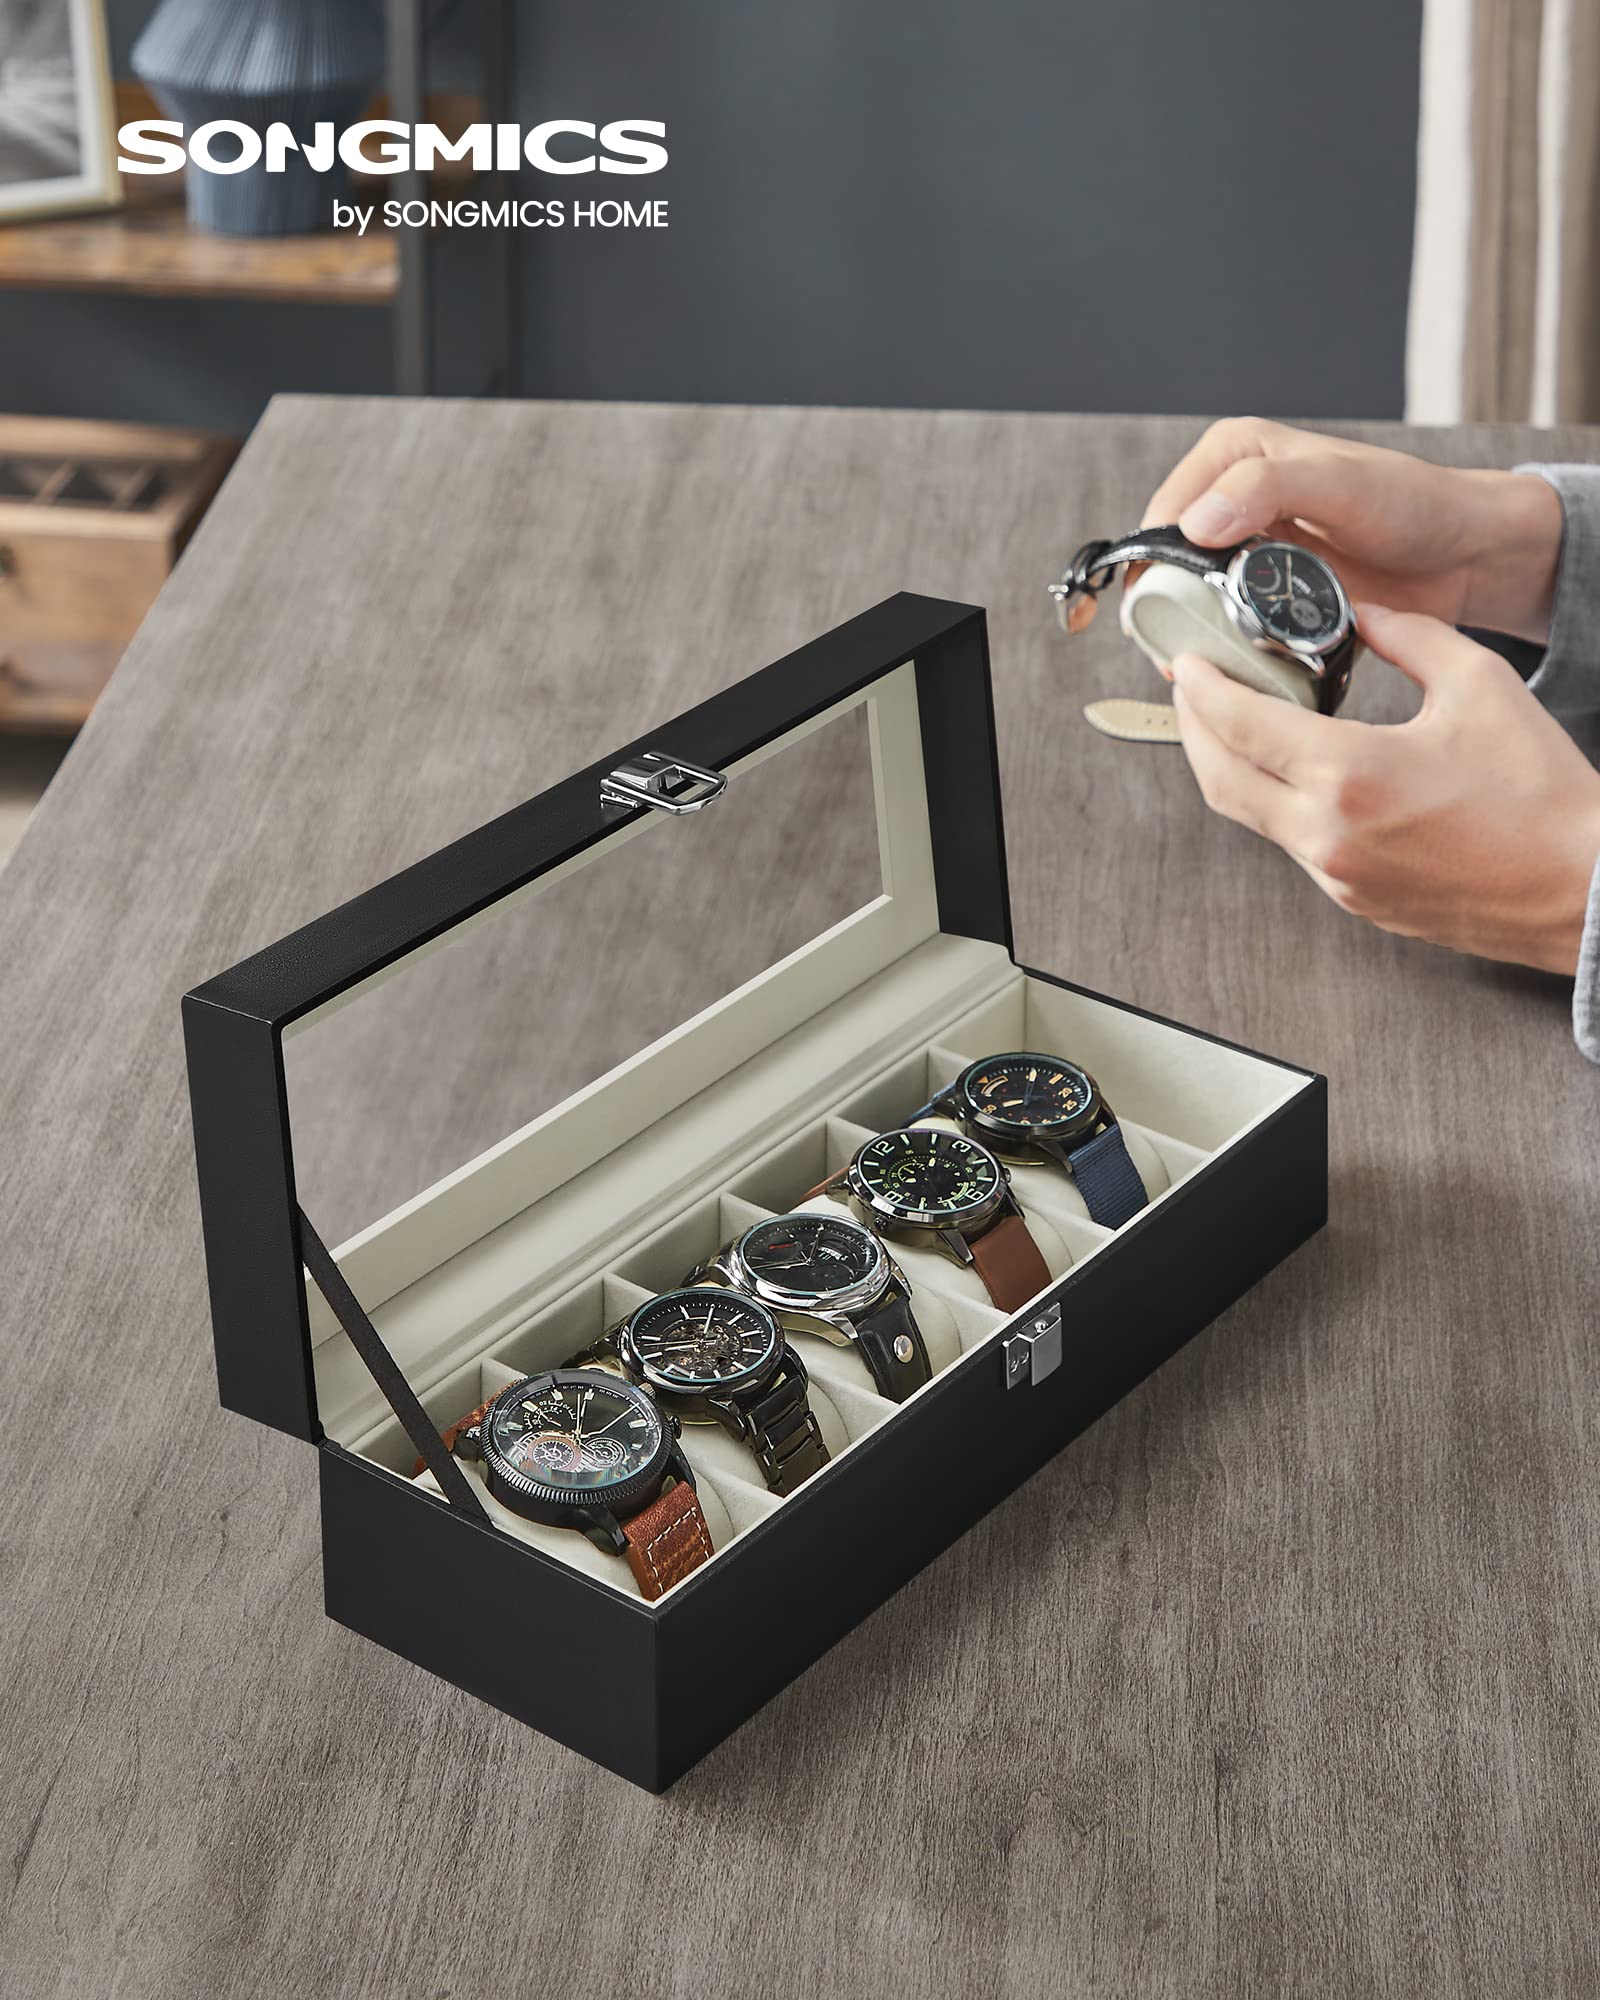 SONGMICS Watch Box, 6-Slot Watch Case with Large Glass Lid, Removable Watch Pillows, Watch Box Organizer, Gift for Loved Ones, Black Synthetic Leather, Greenish Beige Lining UJWB06BE